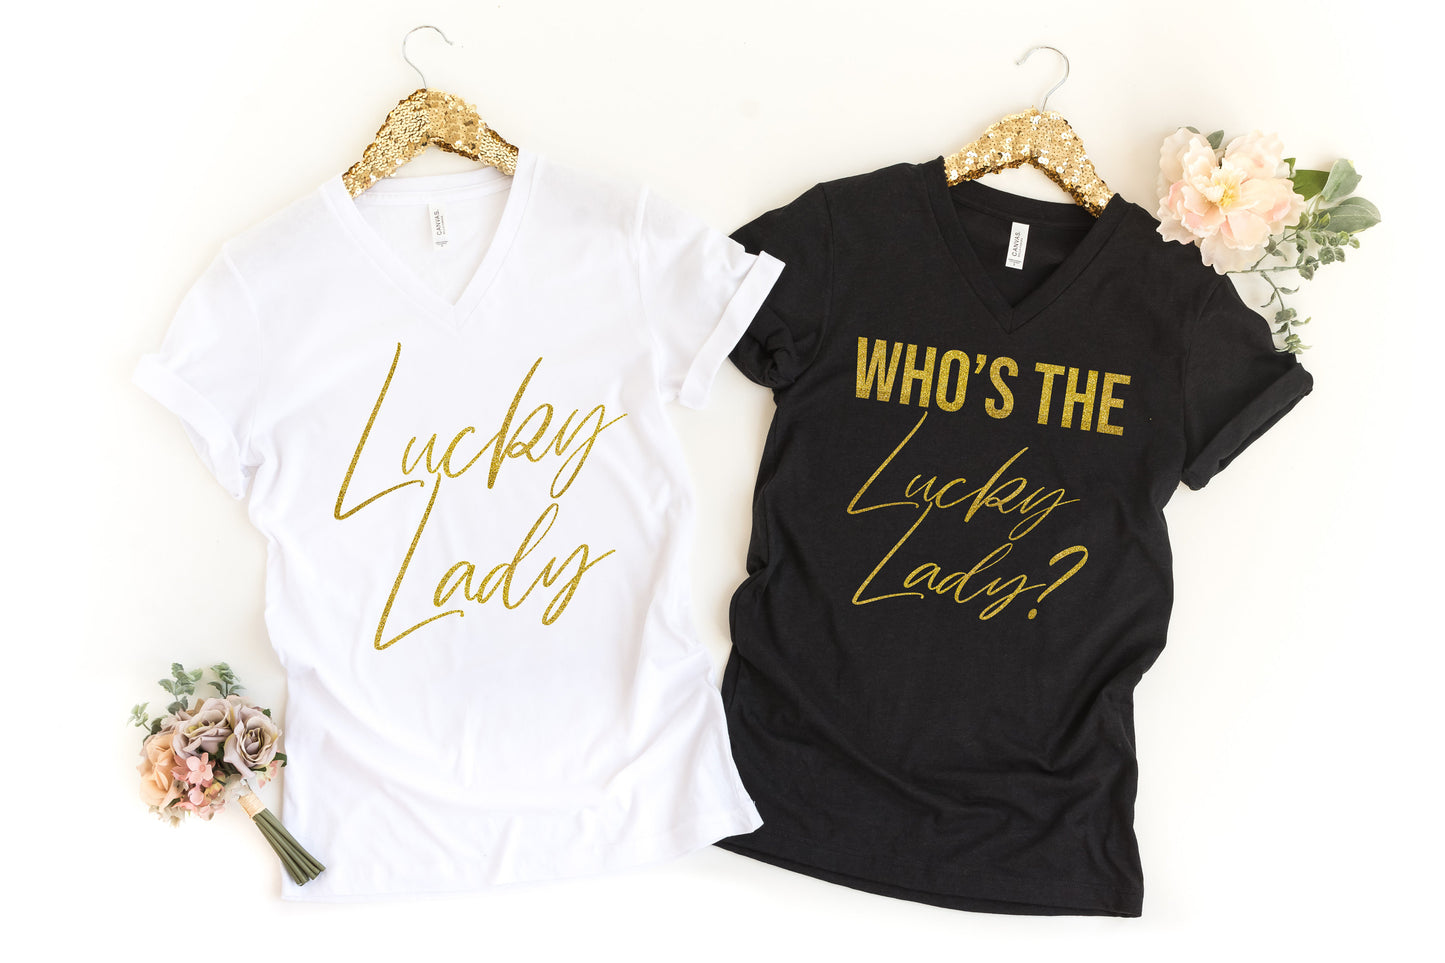 Who&#39;s the Lucky Lady? & Lucky Lady Women&#39;s V-neck Bachelorette Party T-Shirts - Black and Gold Wedding - bachelorette matching tees